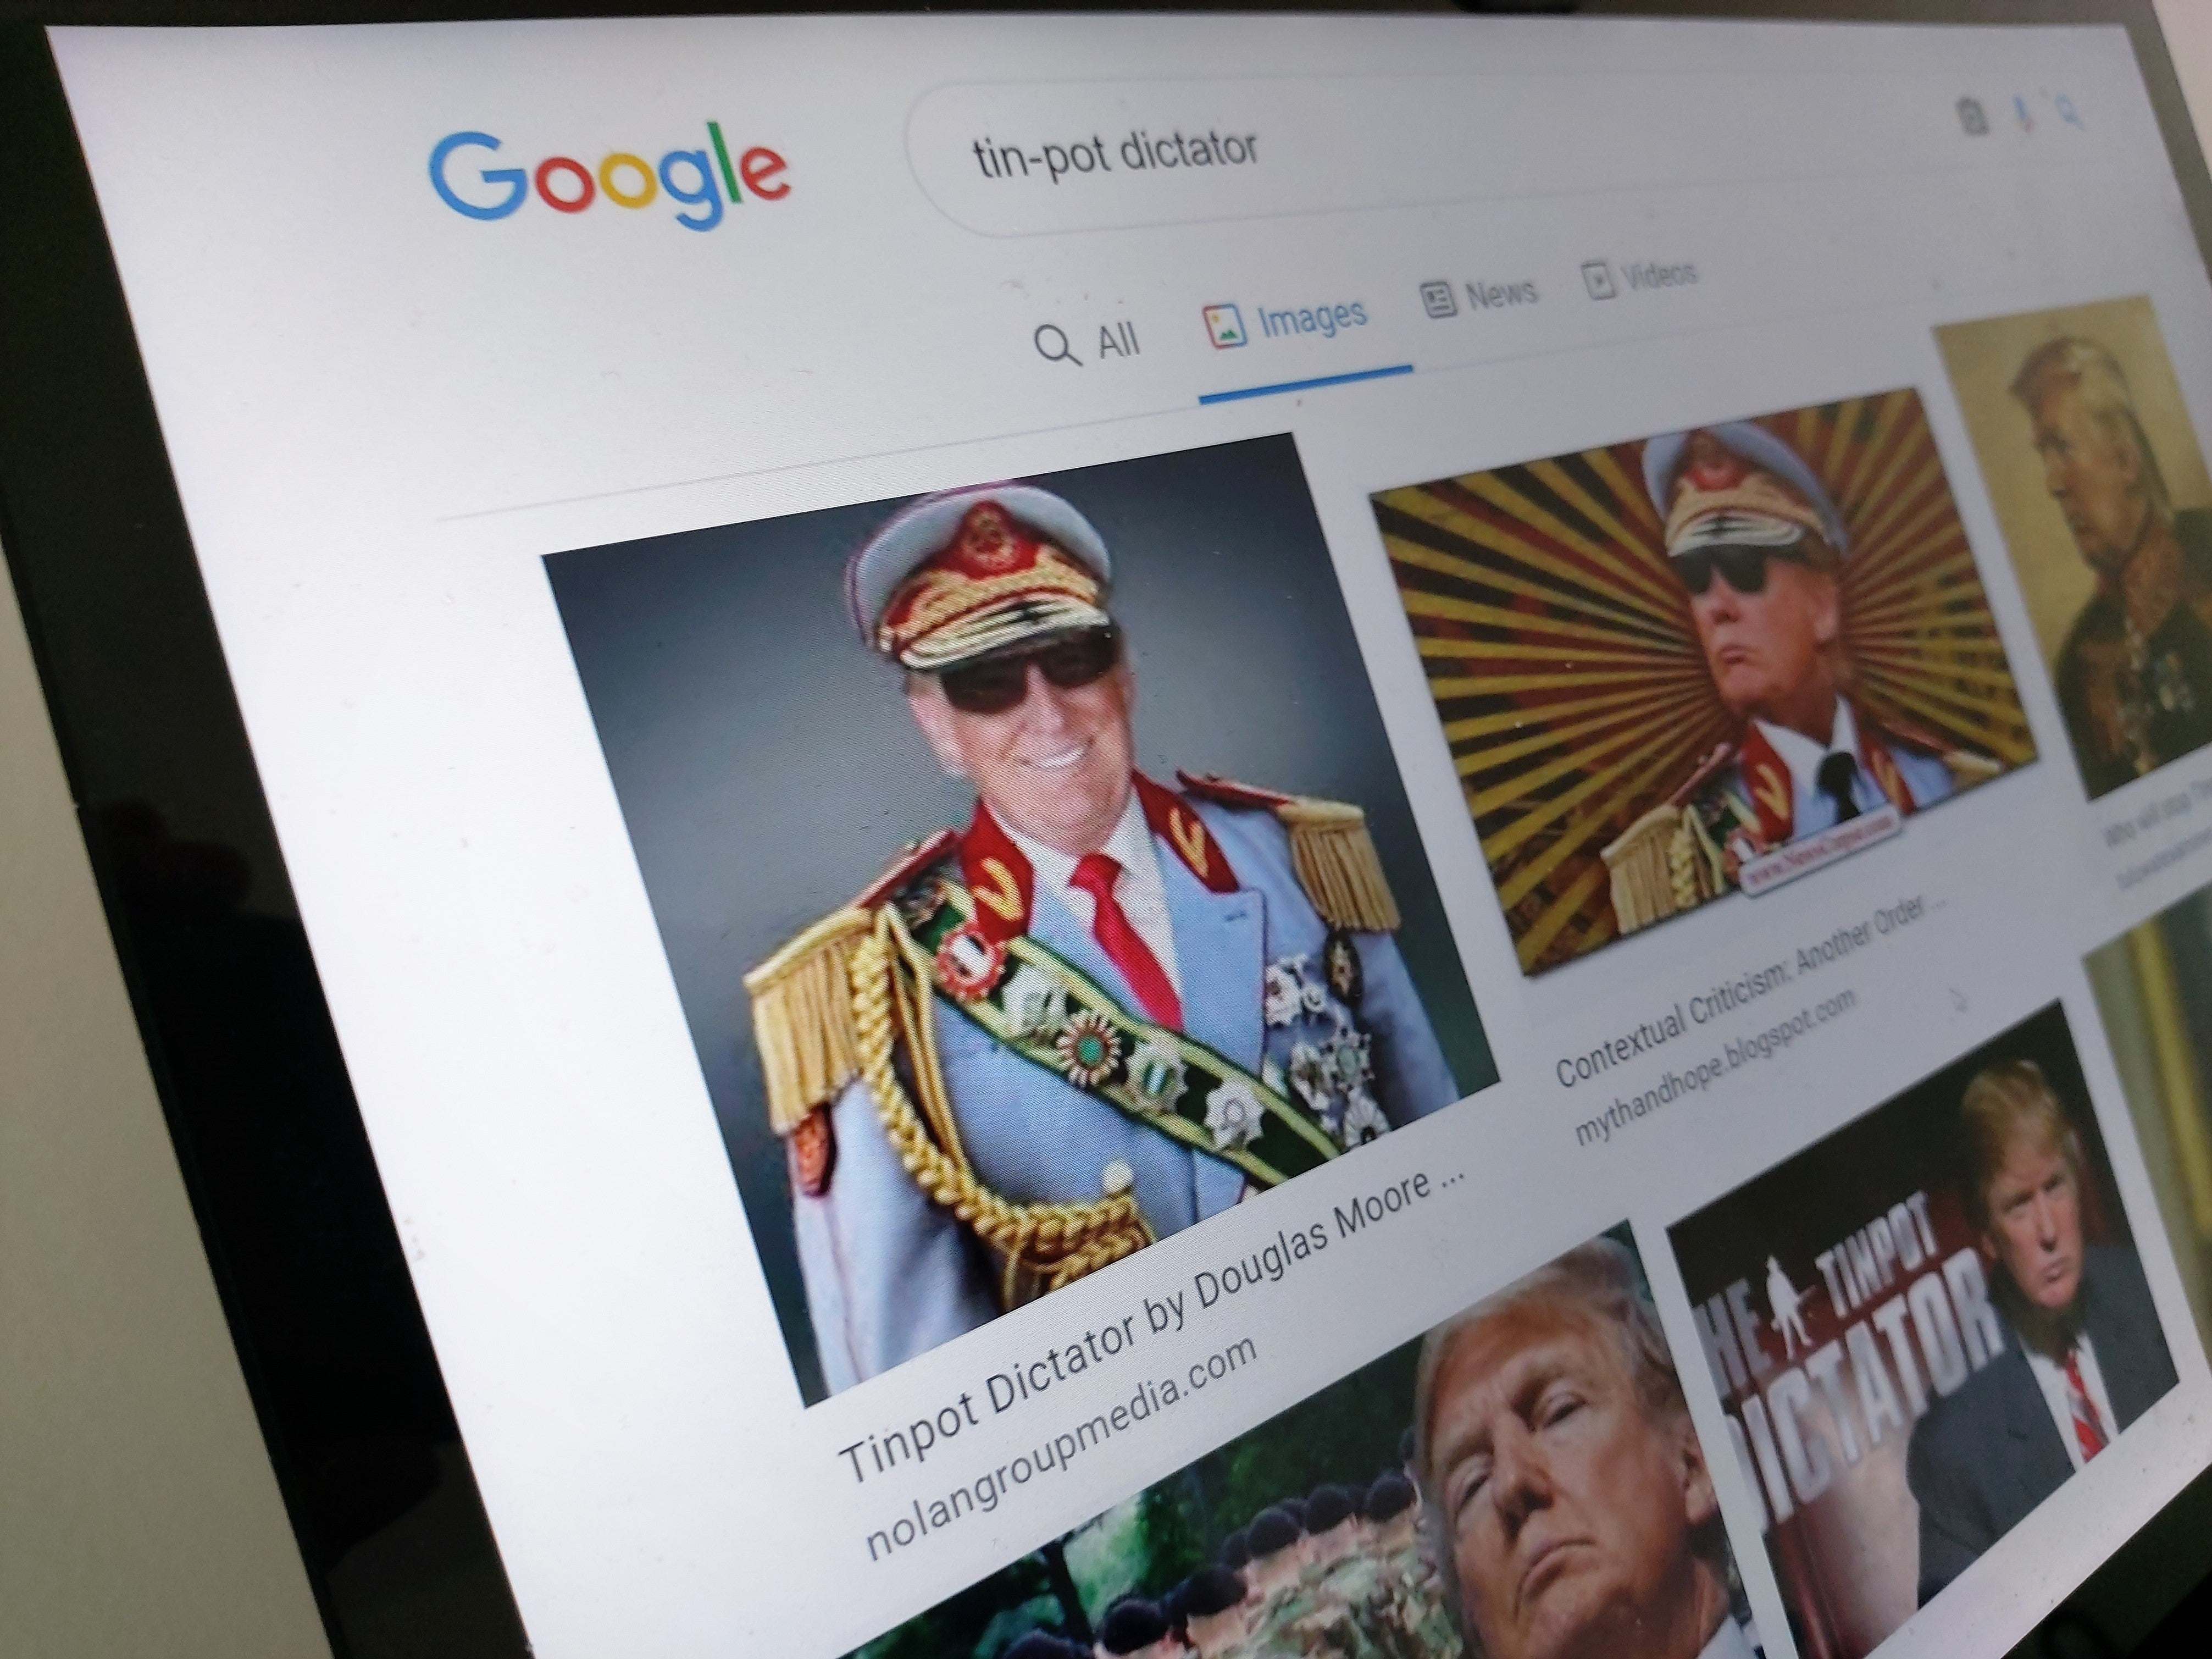 A photoshopped image of Donald Trump ranks as the top result when searching ‘tin-pot dictator’ on Google images